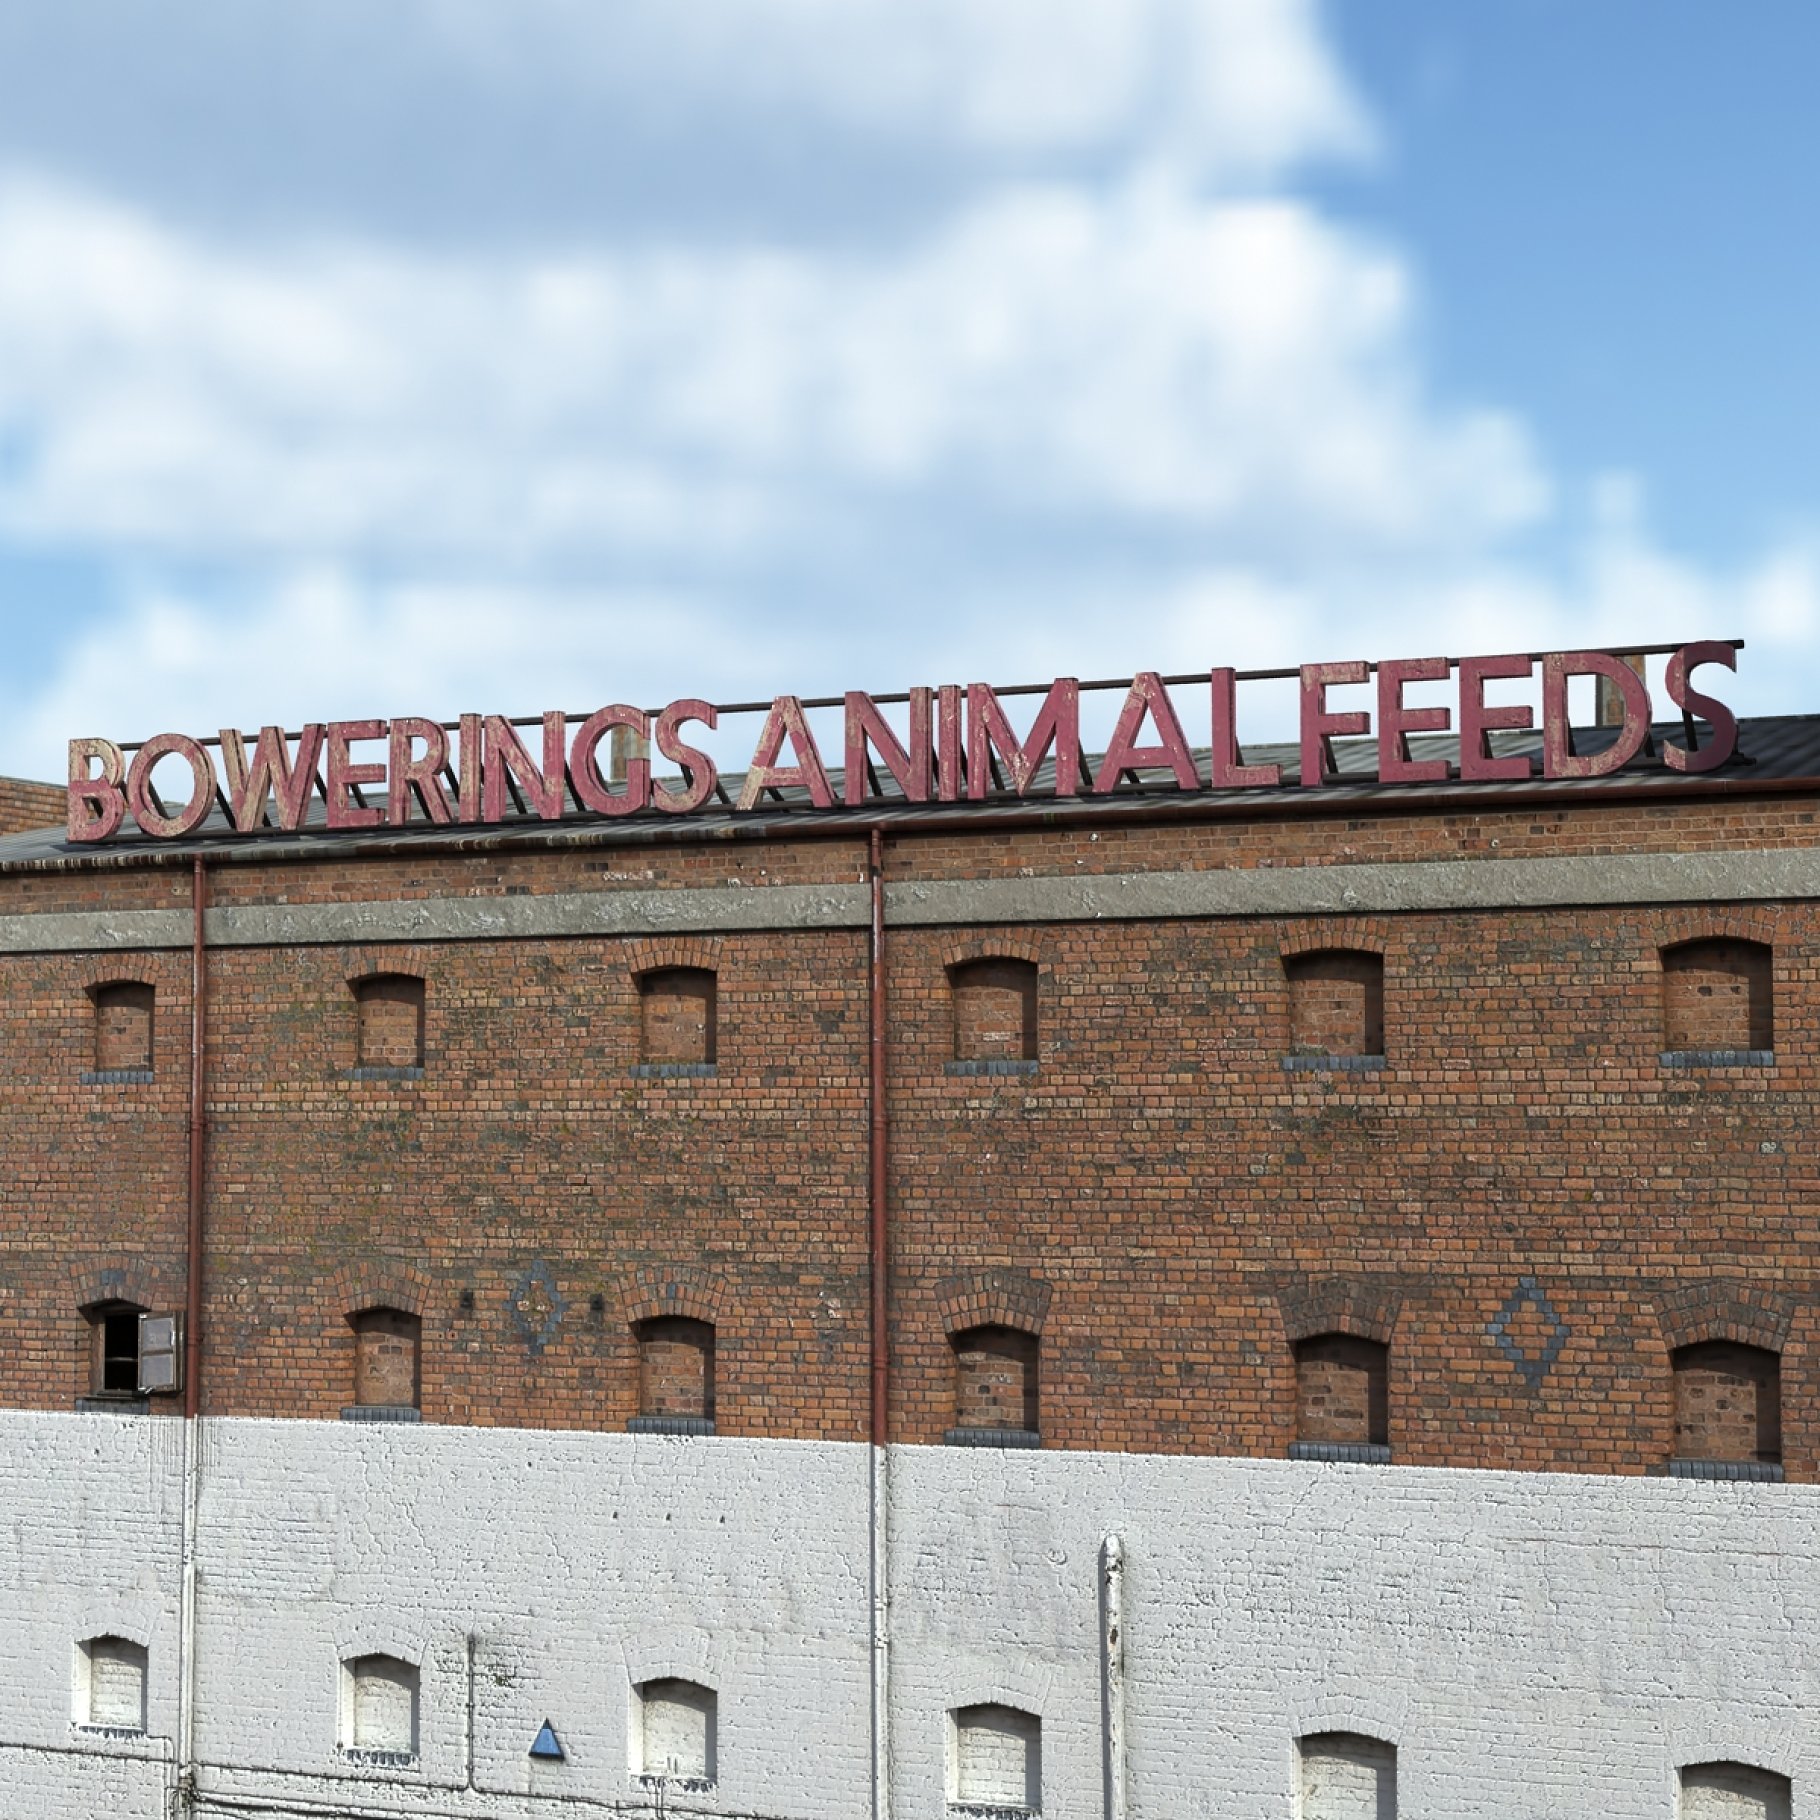 Name of old factory mockup in close-up.